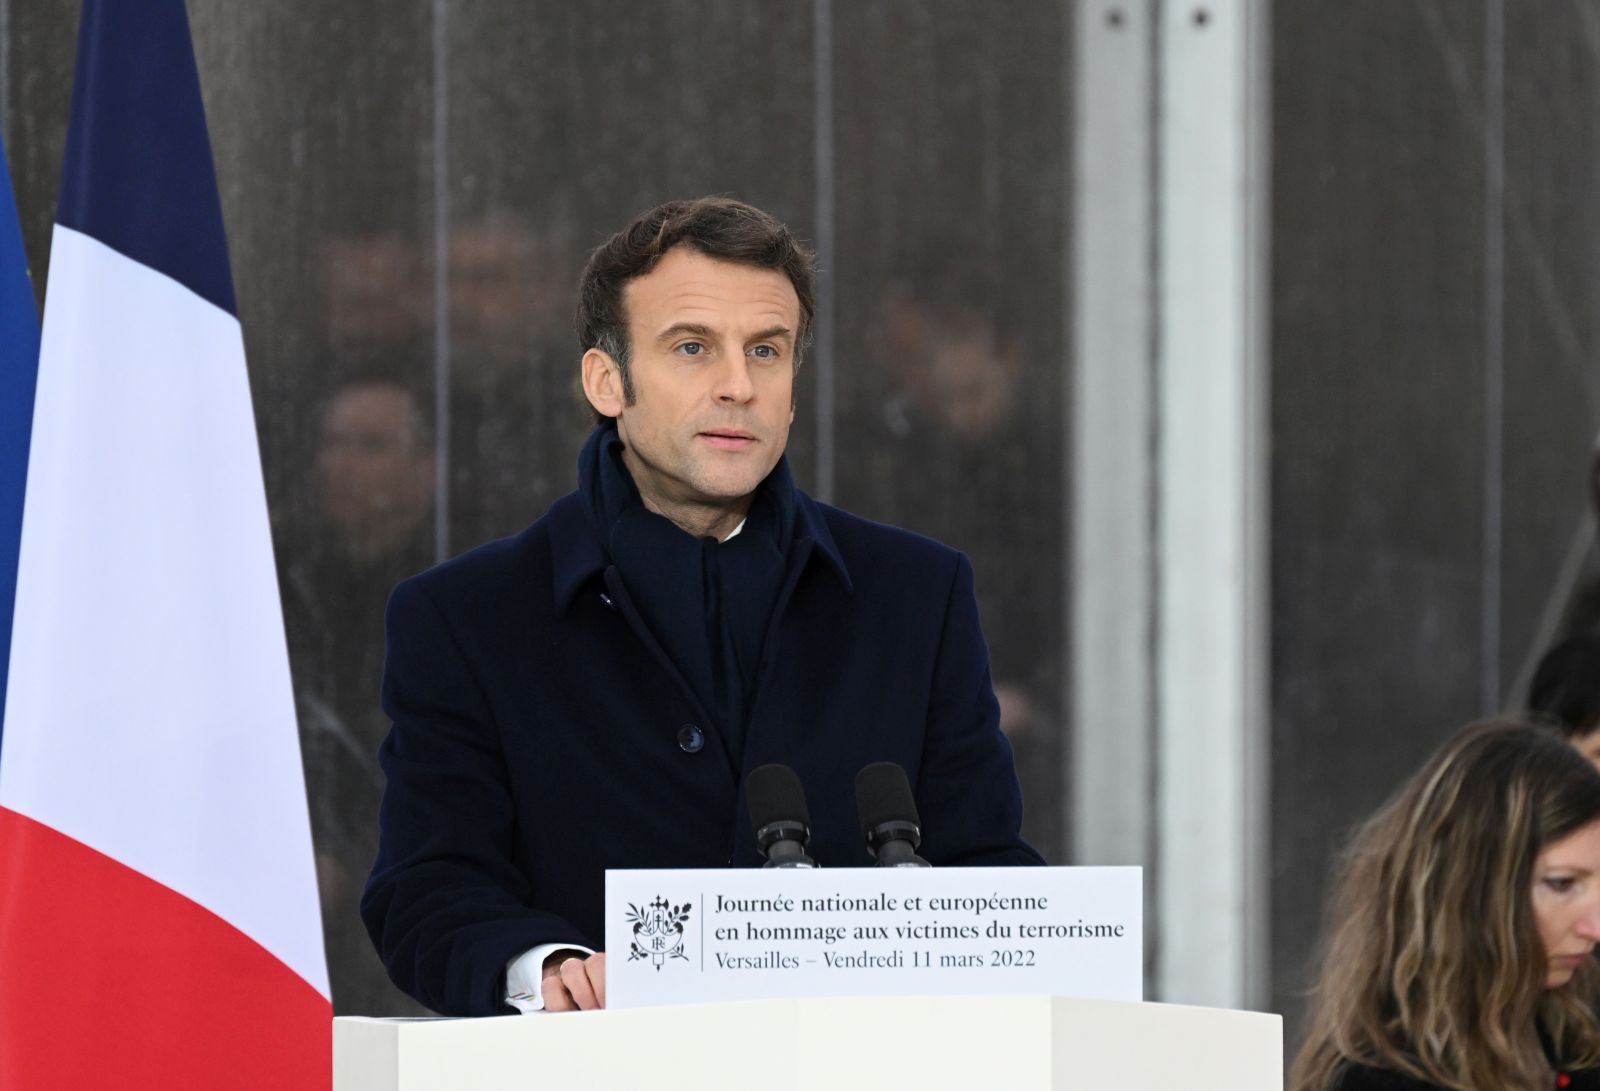 epa09817683 France's President Emmanuel Macron gives a speech during a National and European Day in Tribute to Victims of Terrorism ceremony at the Grand Trianon estate near the Palace of Versailles, south west of Paris, France, 11 March 2022.  EPA/EMMANUEL DUNAND / POOL  MAXPPP OUT